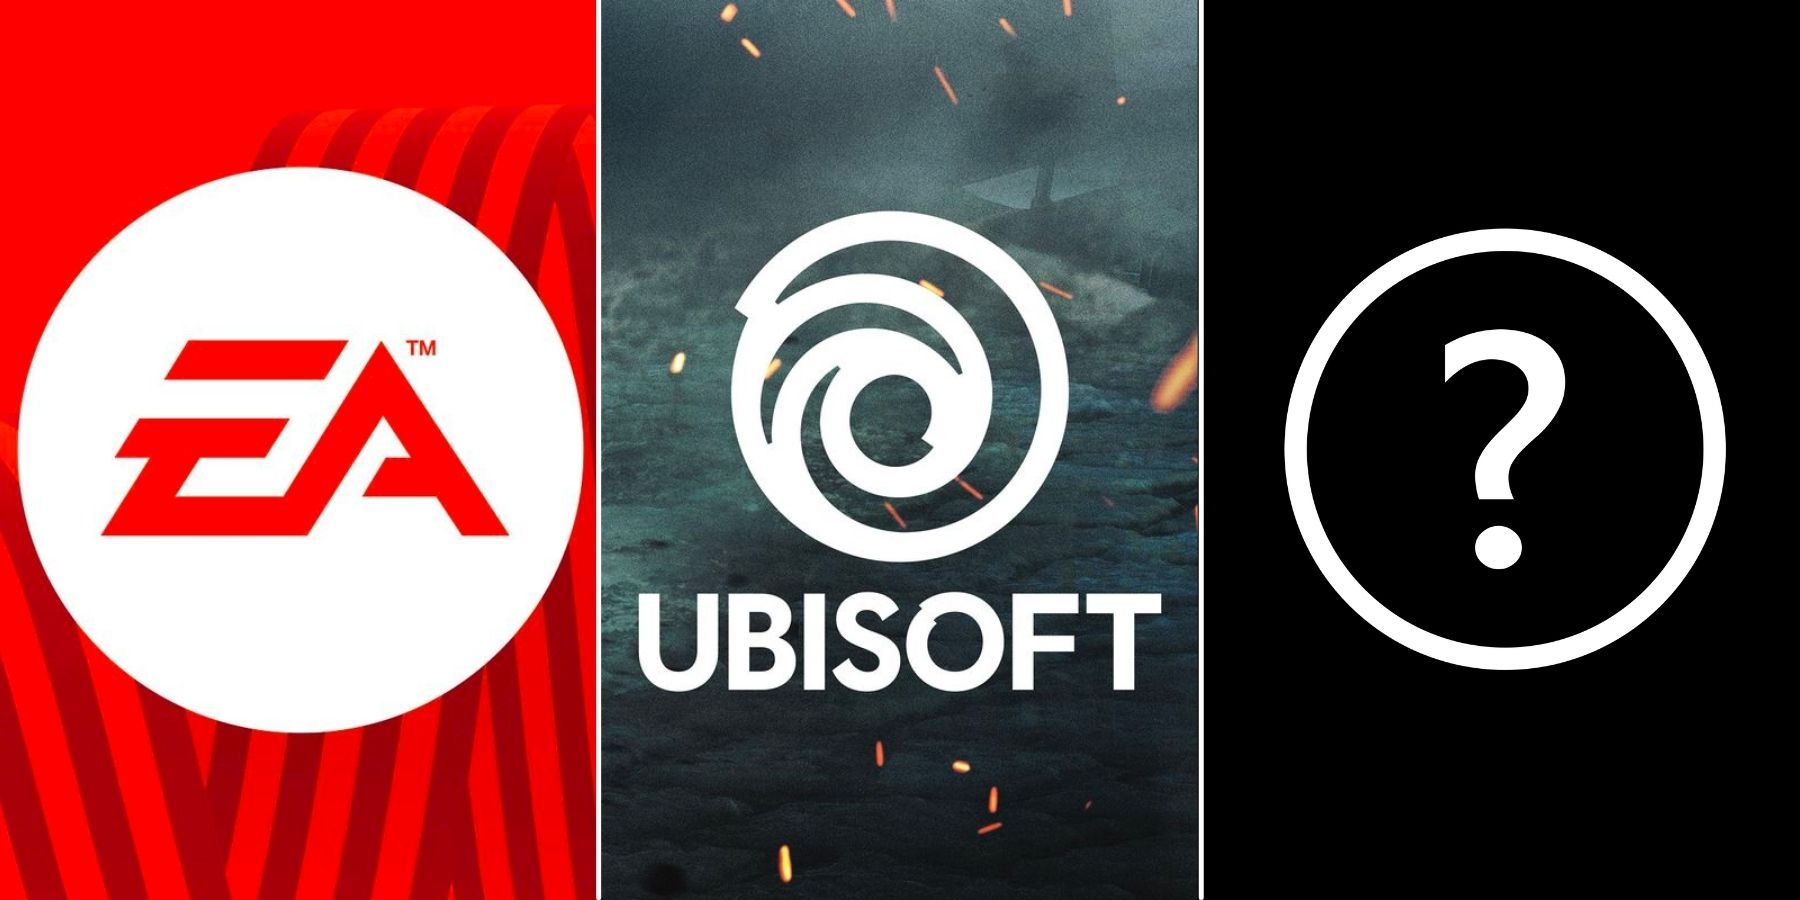 Every game and studio that will become part of Microsoft after the Activision  Blizzard deal - Meristation